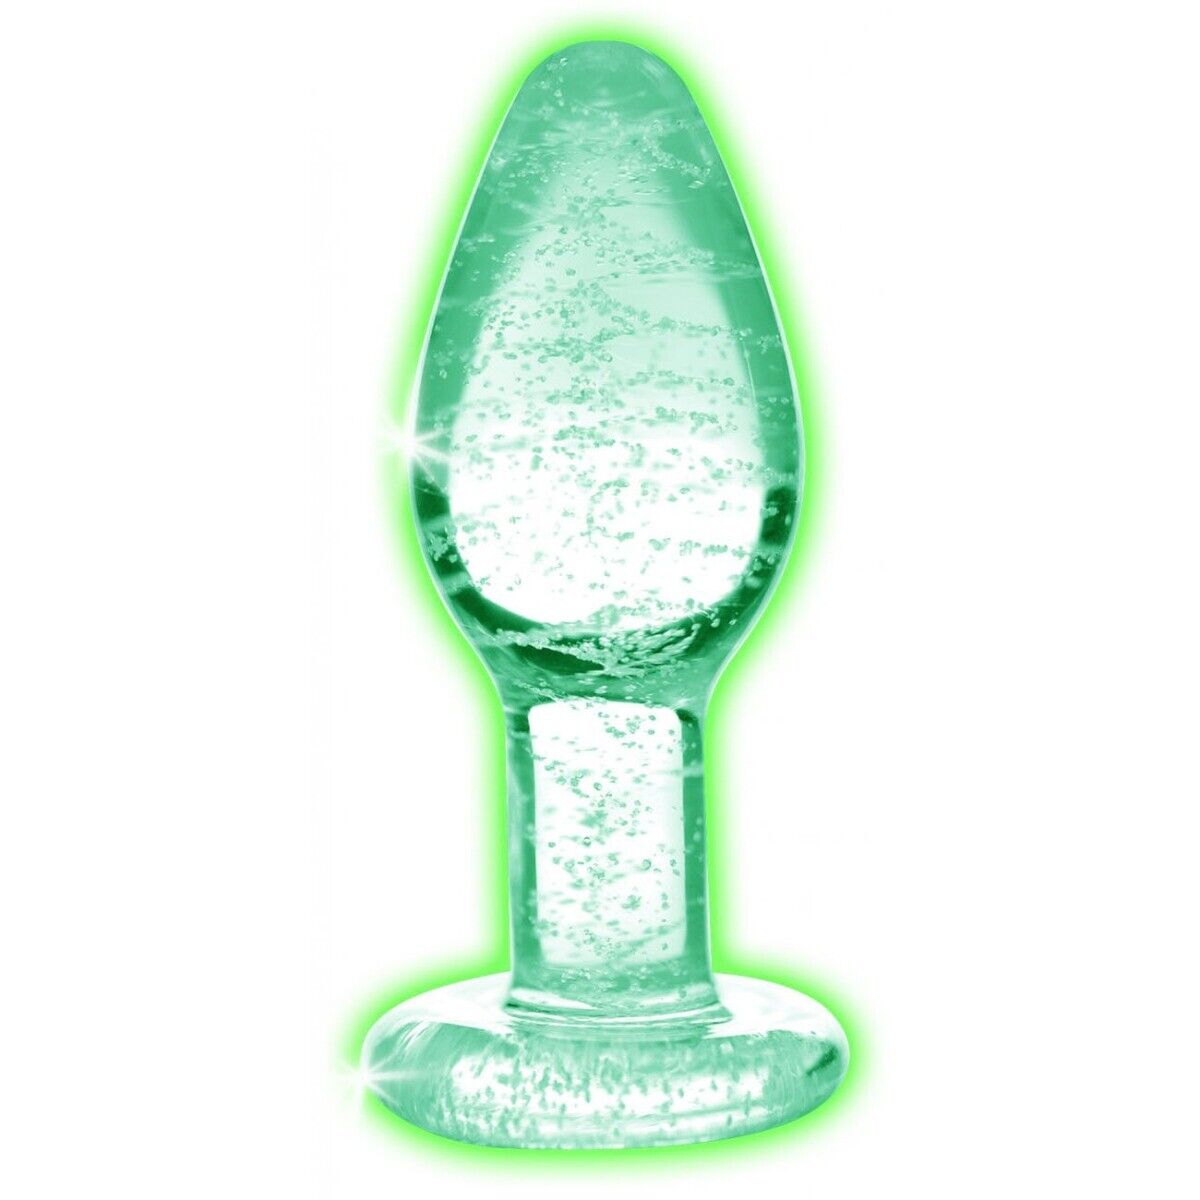 Glow-In-The-Dark Glass Butt Plug Anal Play Sex Toys for Men Women Couples